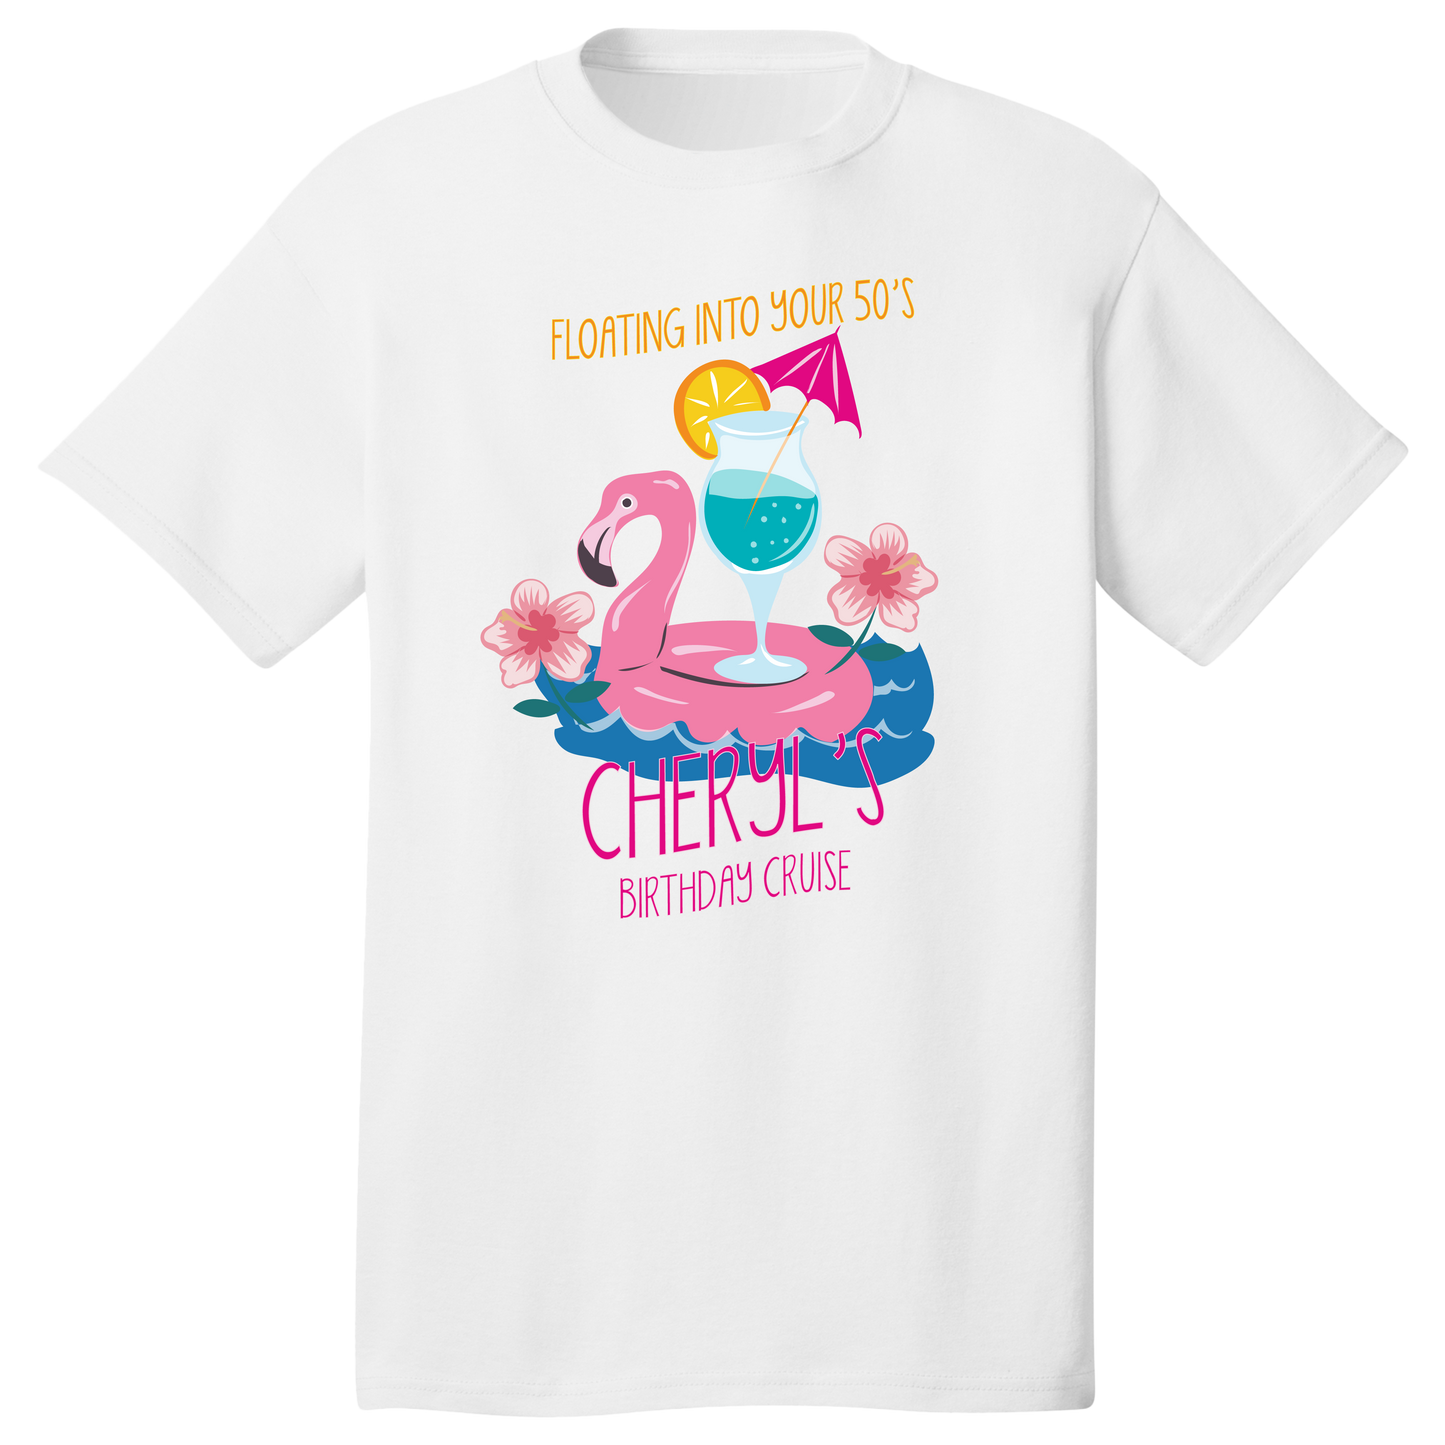 Floating - Women's Personalized T-Shirt